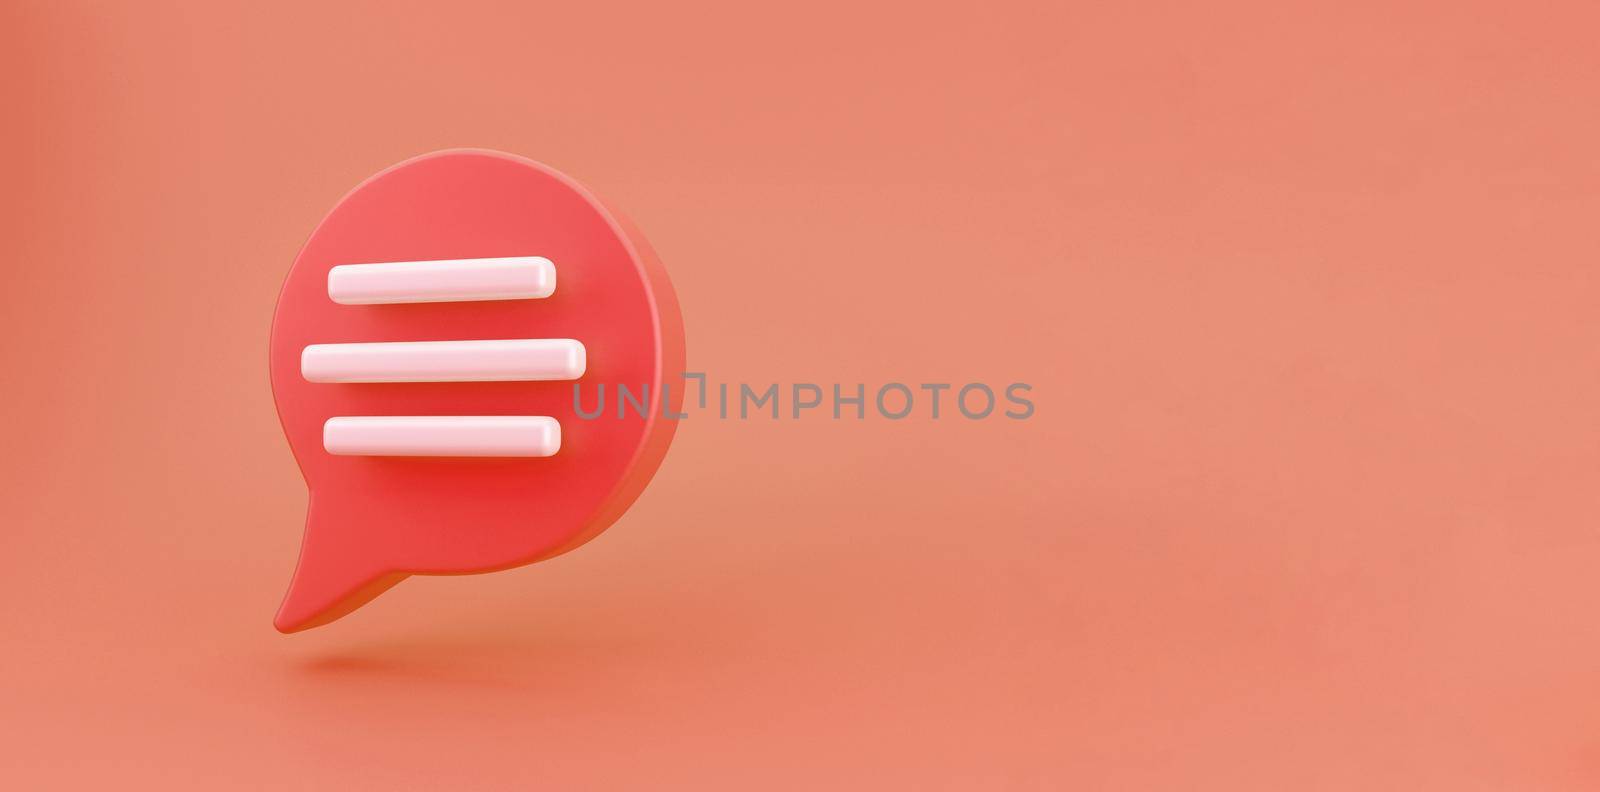 3d red Speech bubble chat icon isolated on orange background. Message creative concept with copy space for text. Communication or comment chat symbol. Minimalism concept. 3d illustration render by lunarts